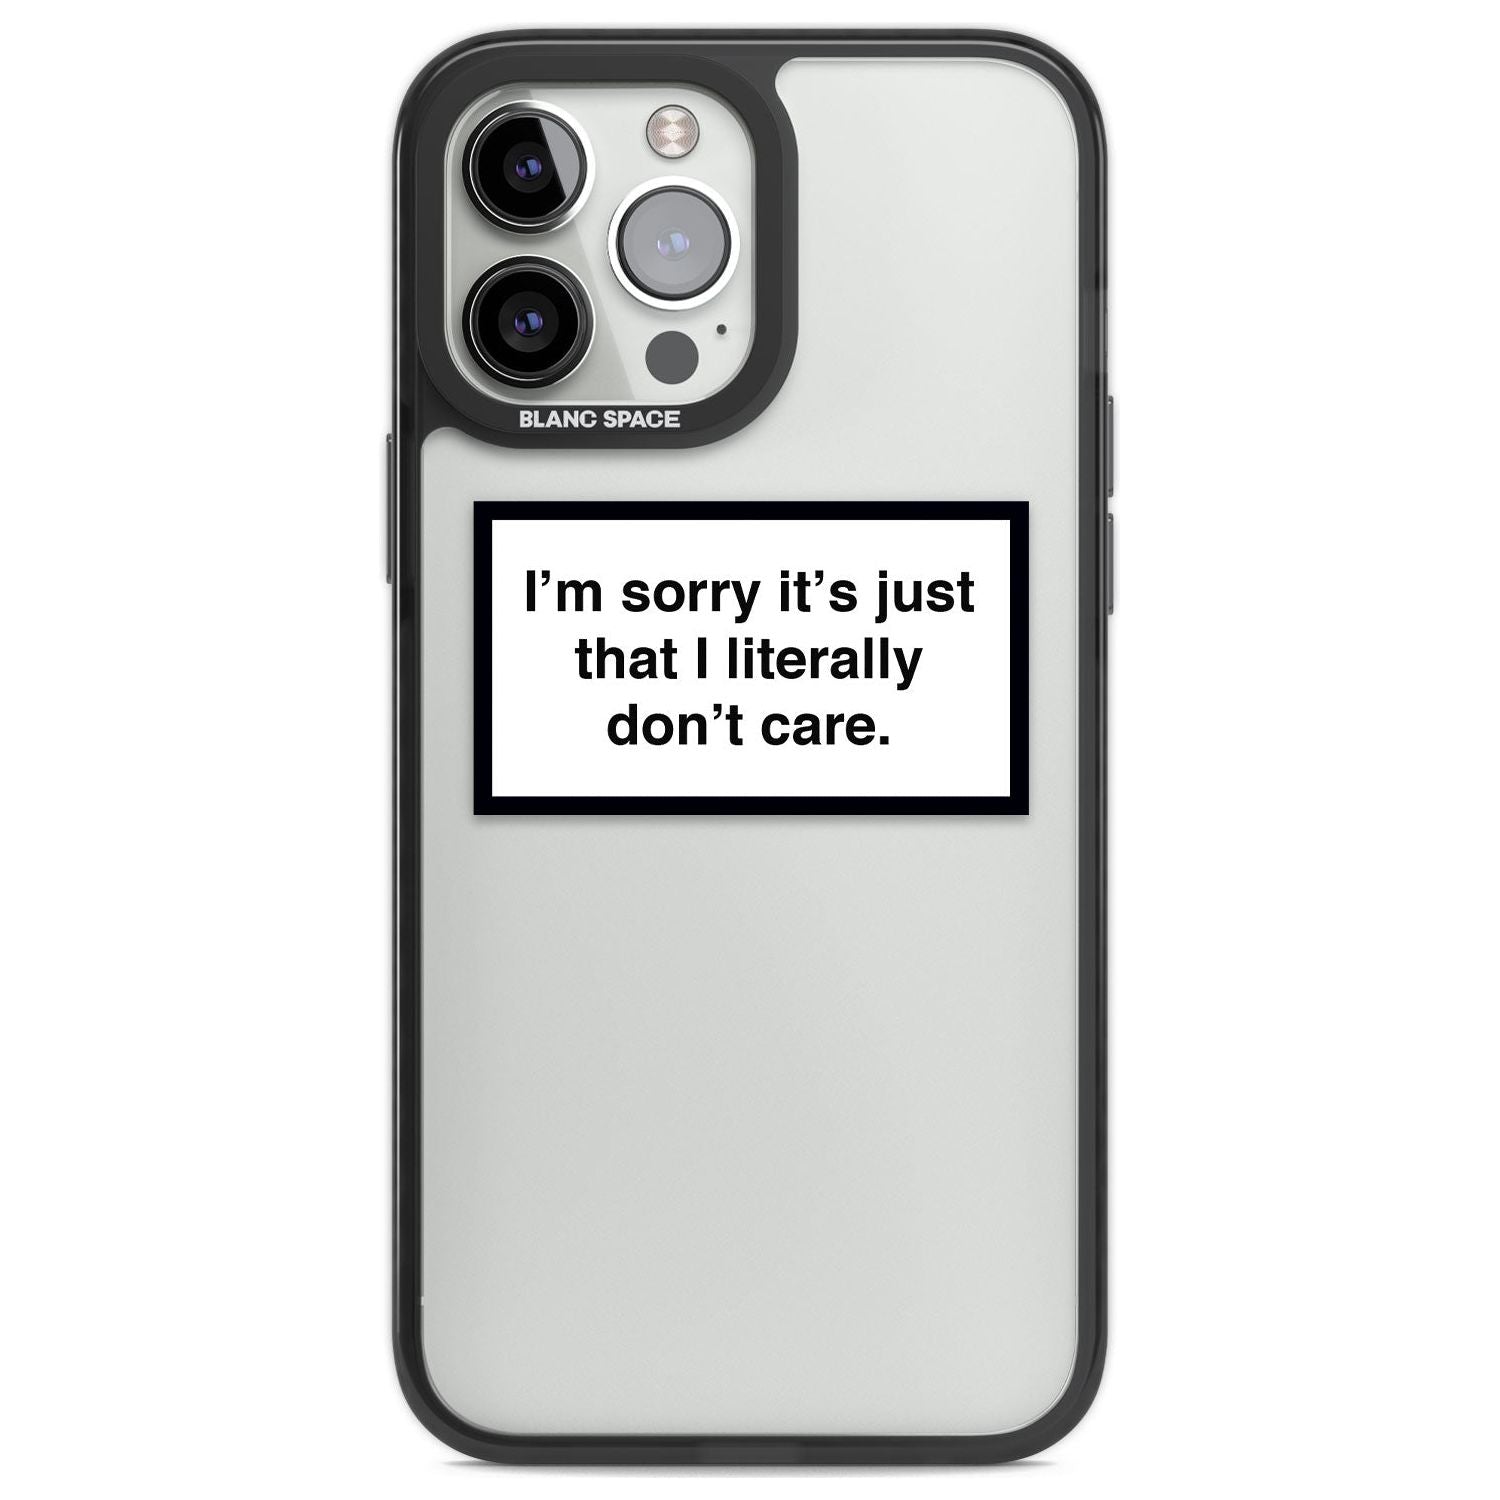 I Literally Don't Care Phone Case iPhone 13 Pro Max / Black Impact Case,iPhone 14 Pro Max / Black Impact Case Blanc Space